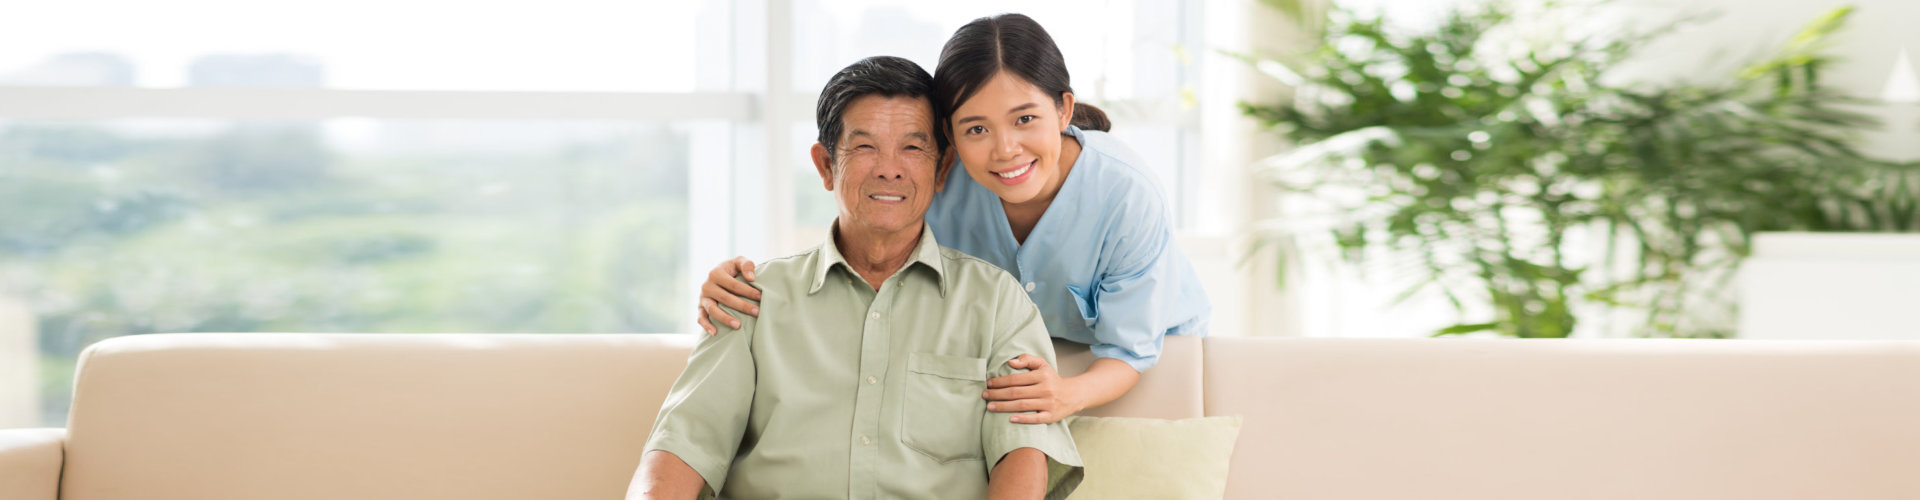 elder man sitting on a couch with caregiver